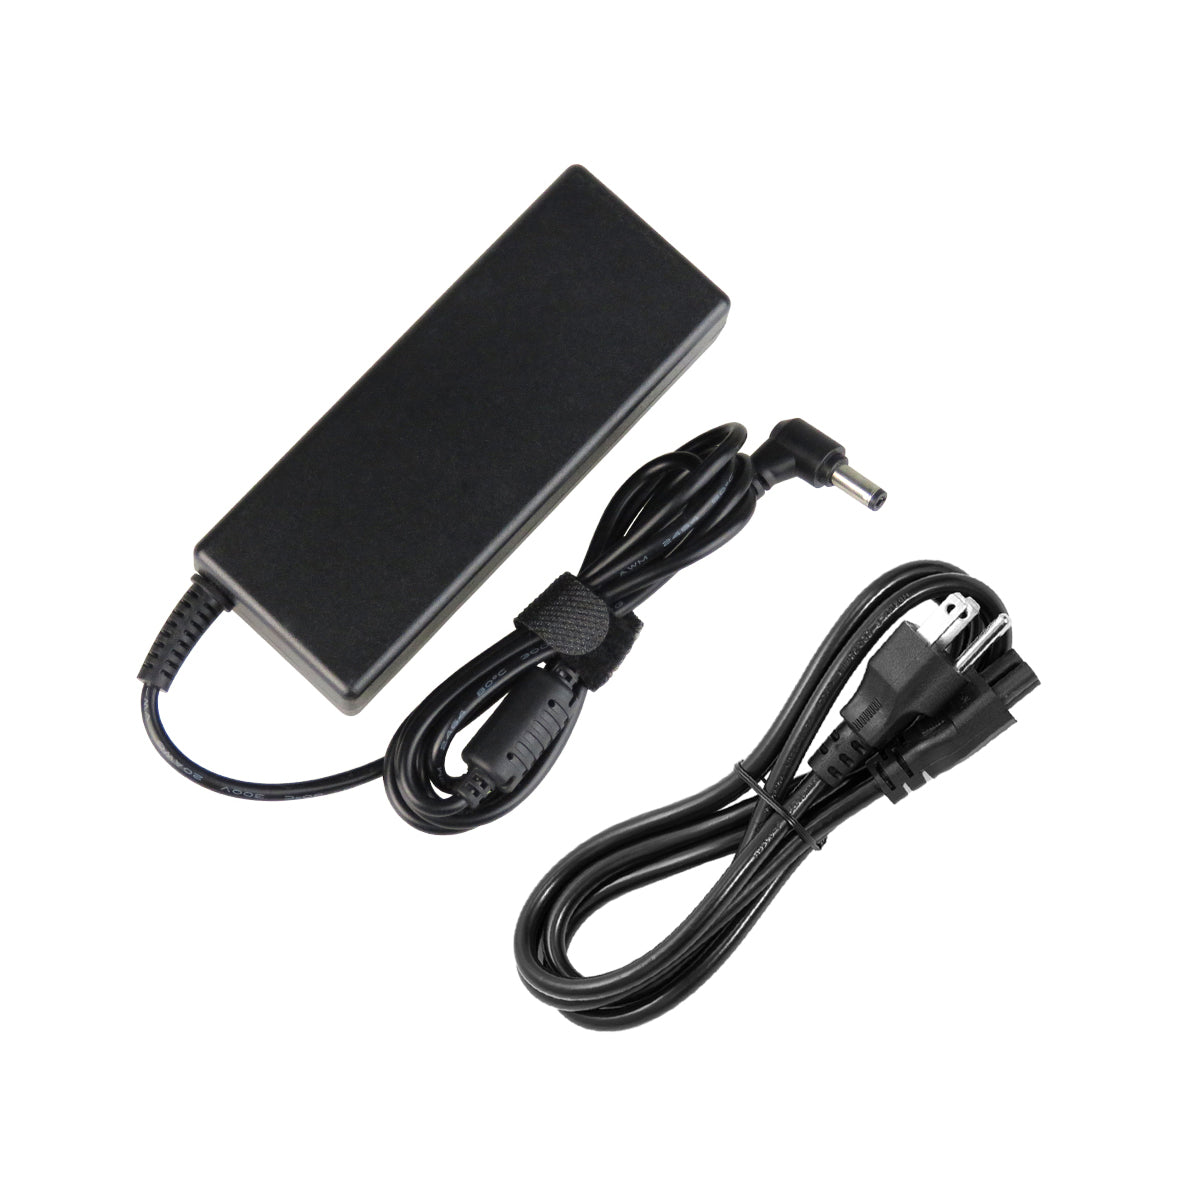 AC Adapter Charger for Lenovo IdeaPad Y560 Notebook.